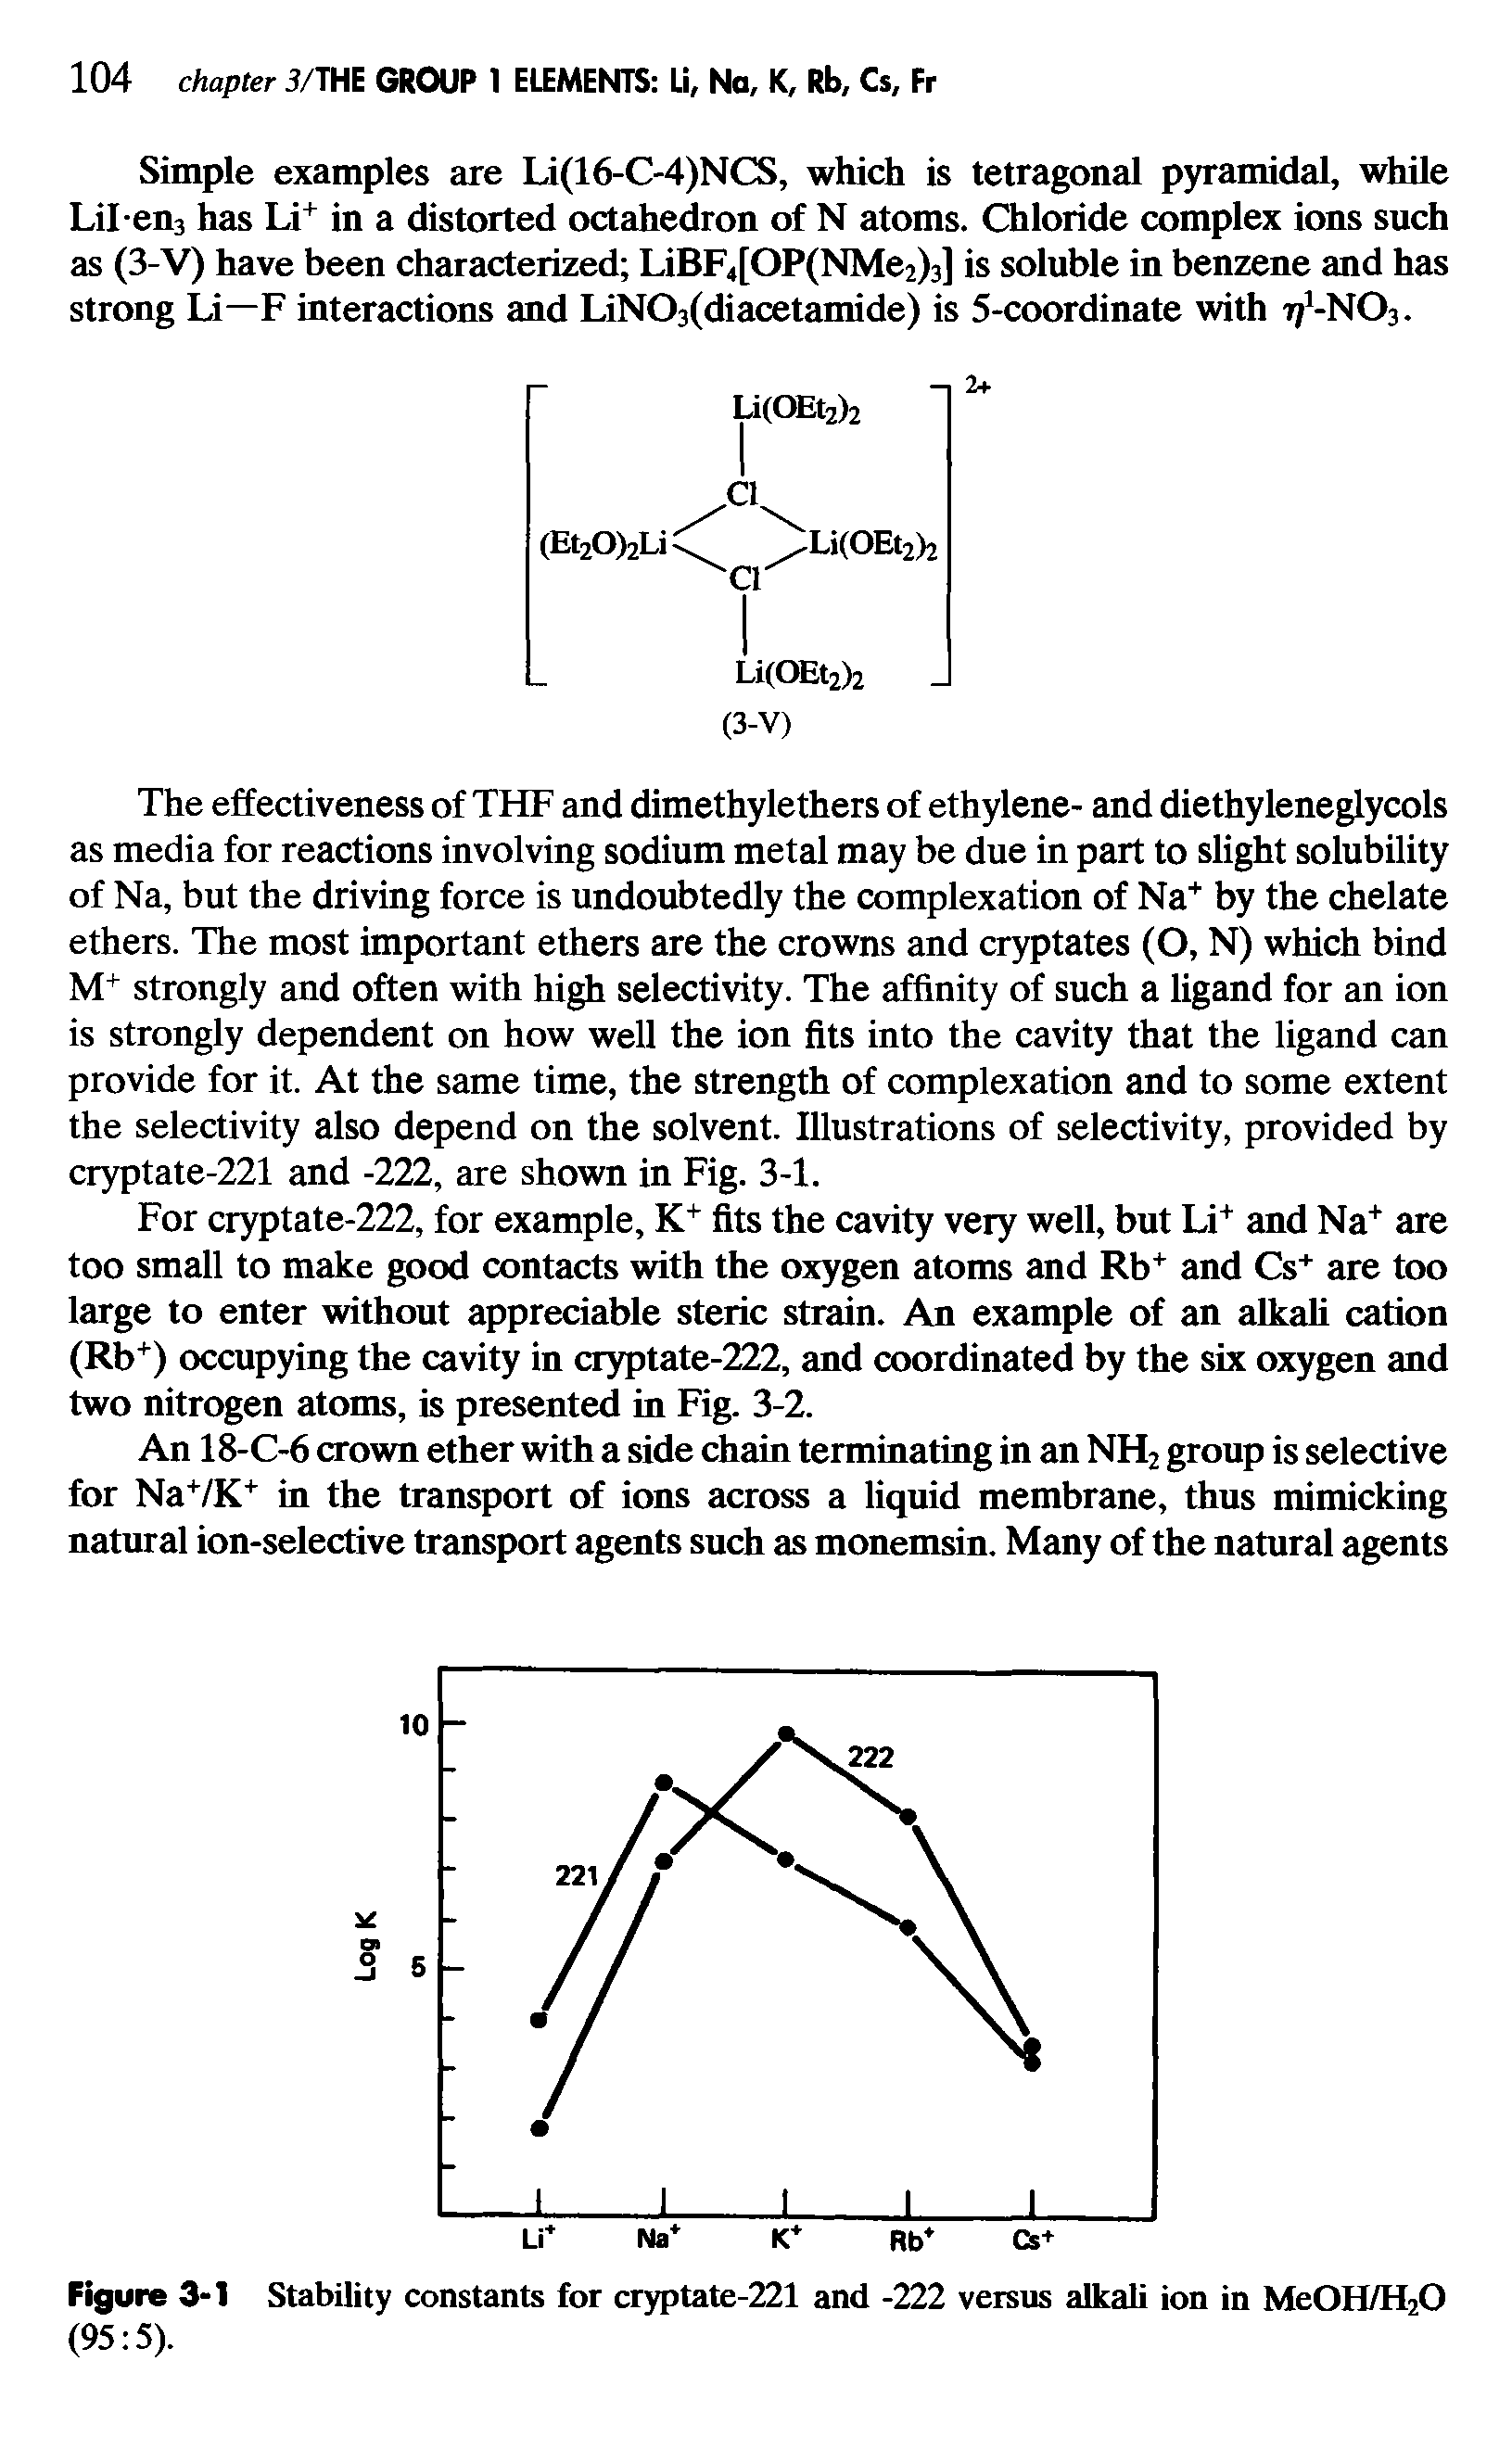 Figure 3-1 Stability constants for cryptate-221 and -222 versus alkali ion in MeOH/H20 (95 5).